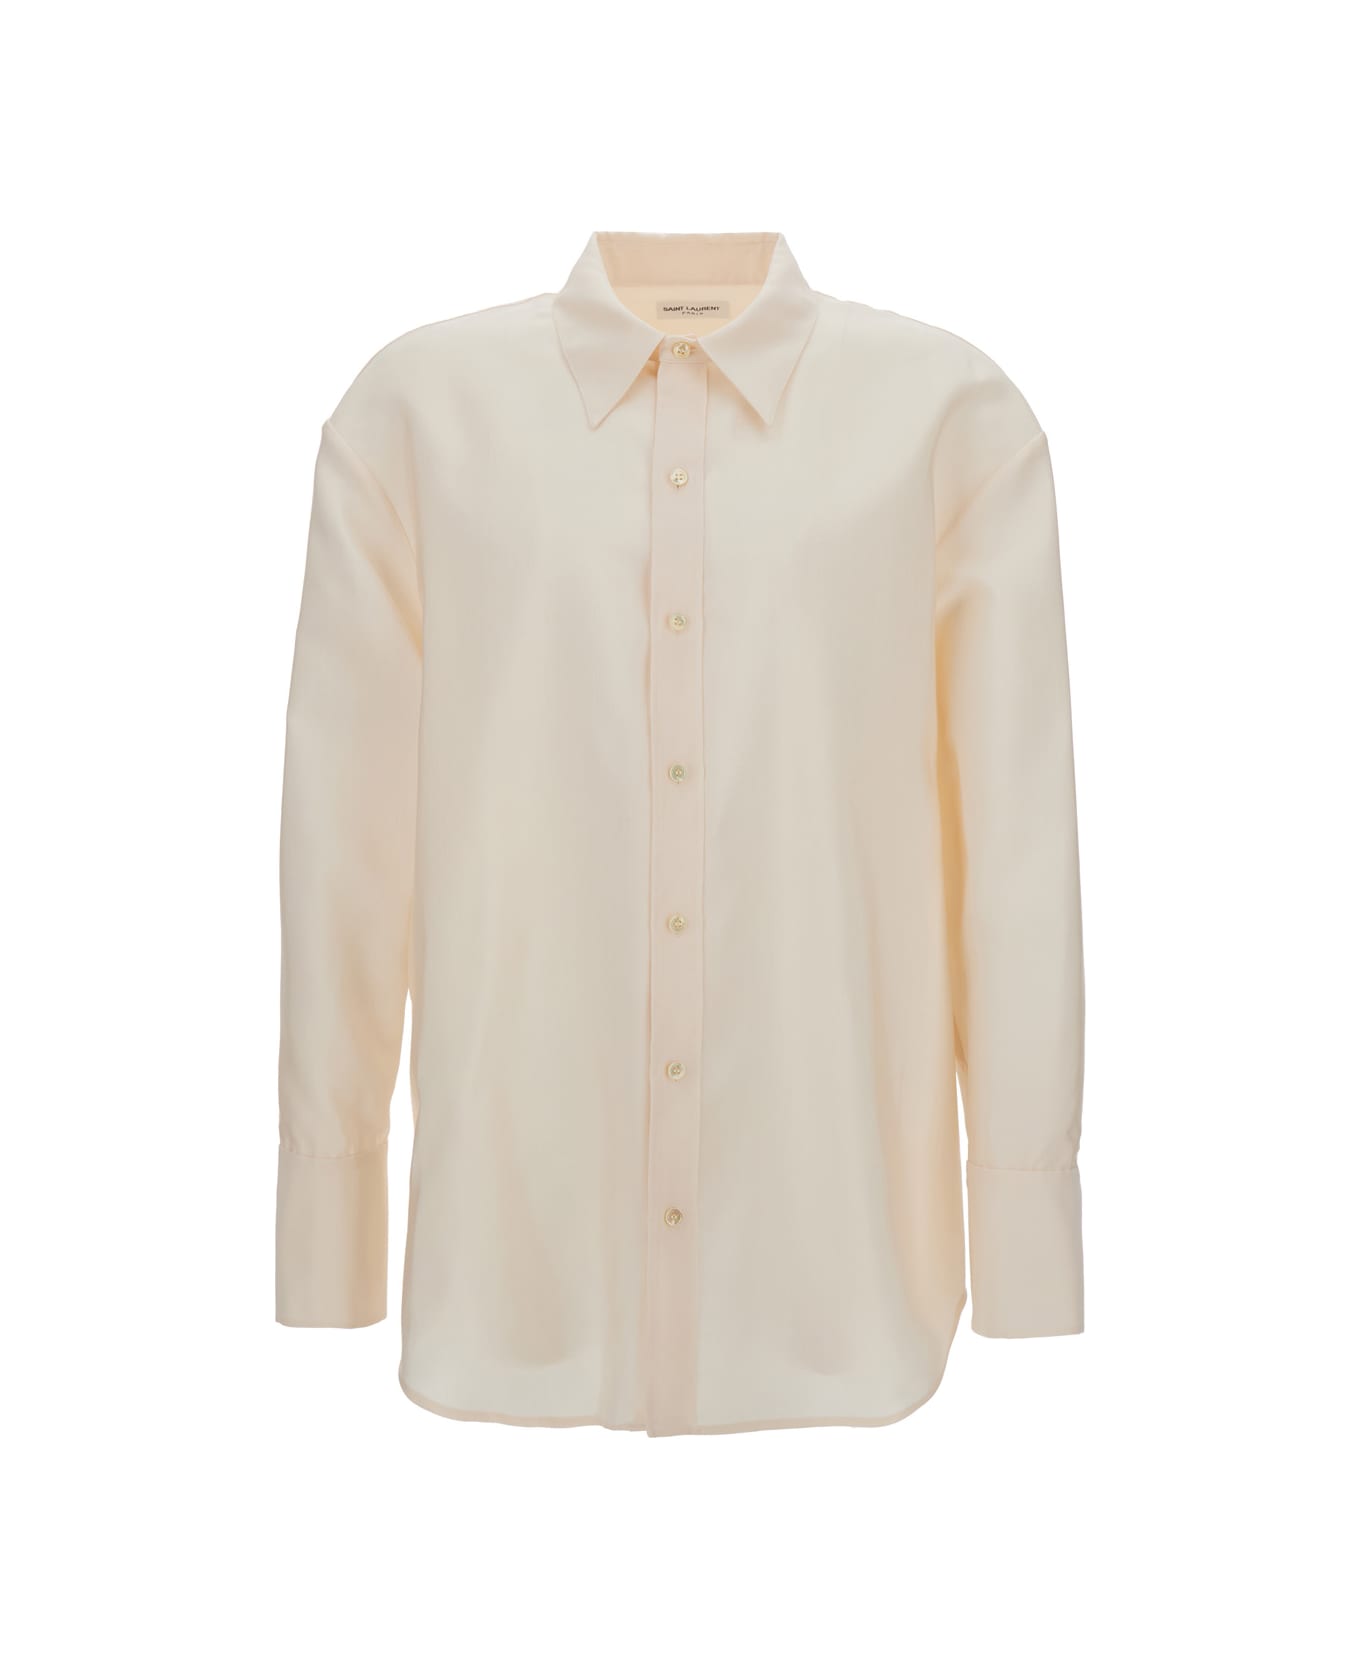 Saint Laurent Ivory White Buttoned Oversized Shirt In Technical Fabric Man - White シャツ